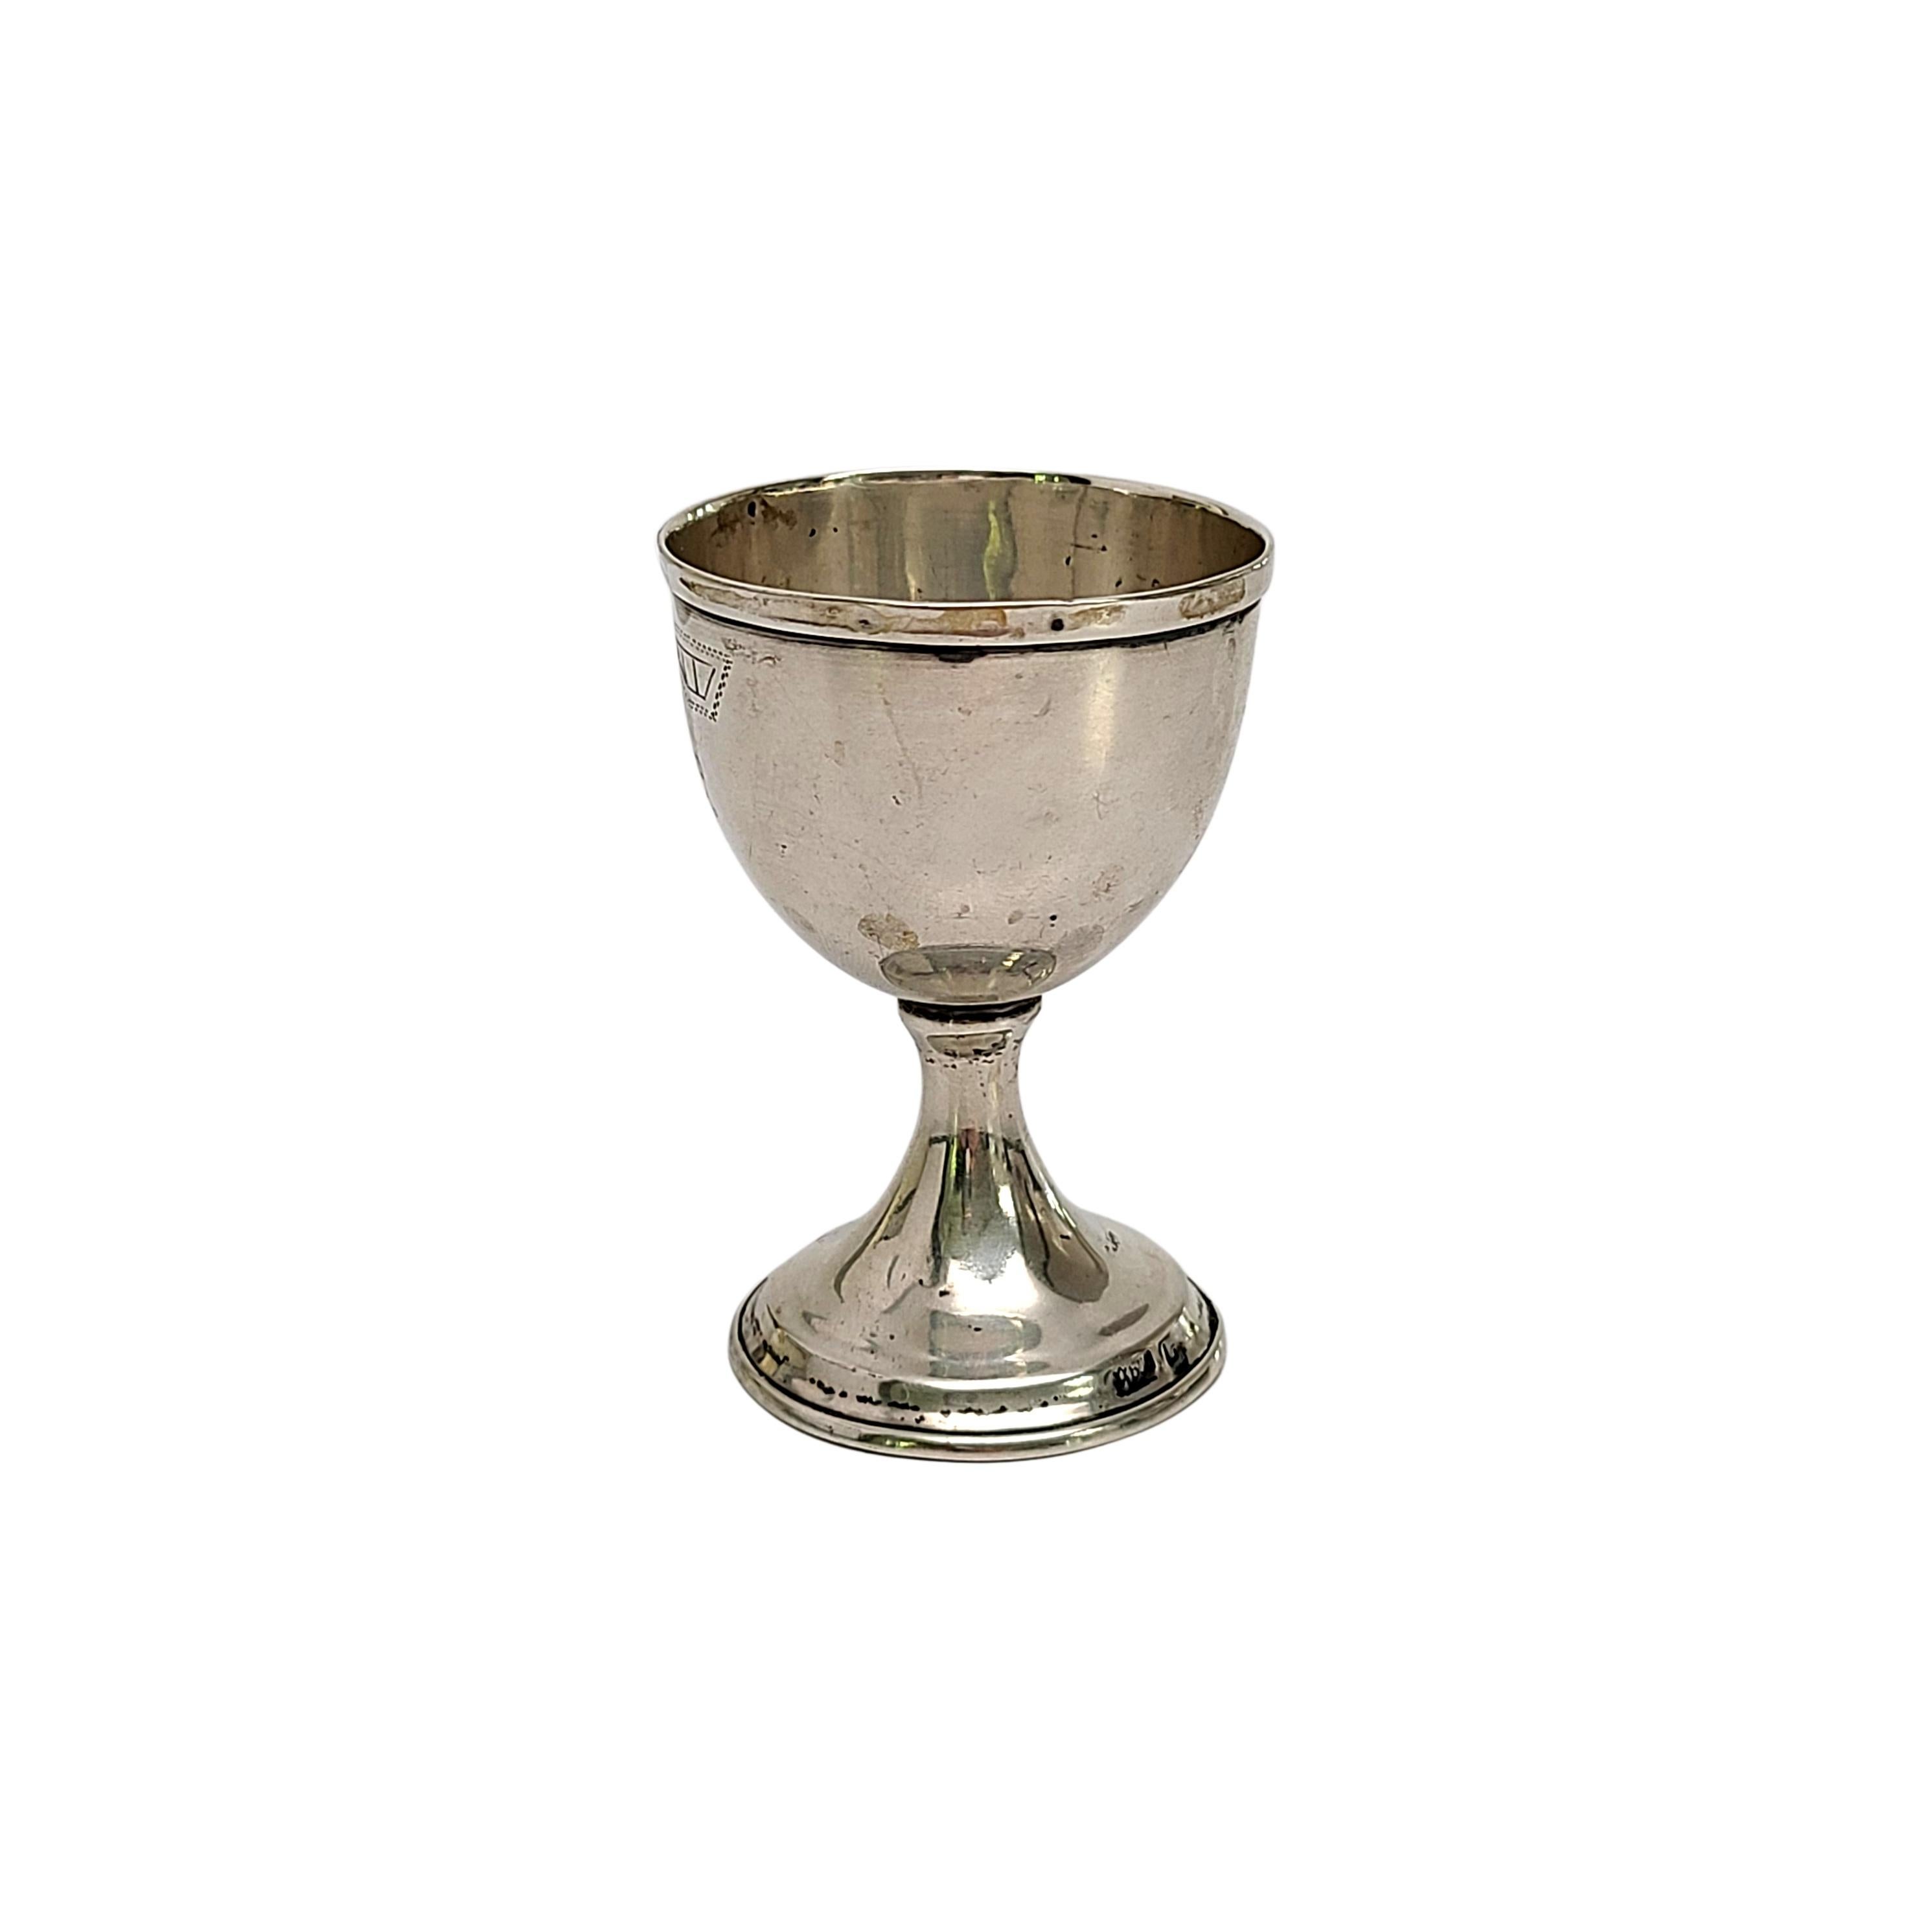 800 silver kiddush cup.

Small goblet with etched design and engraved with Hebrew letters.

Measures 2 1/2